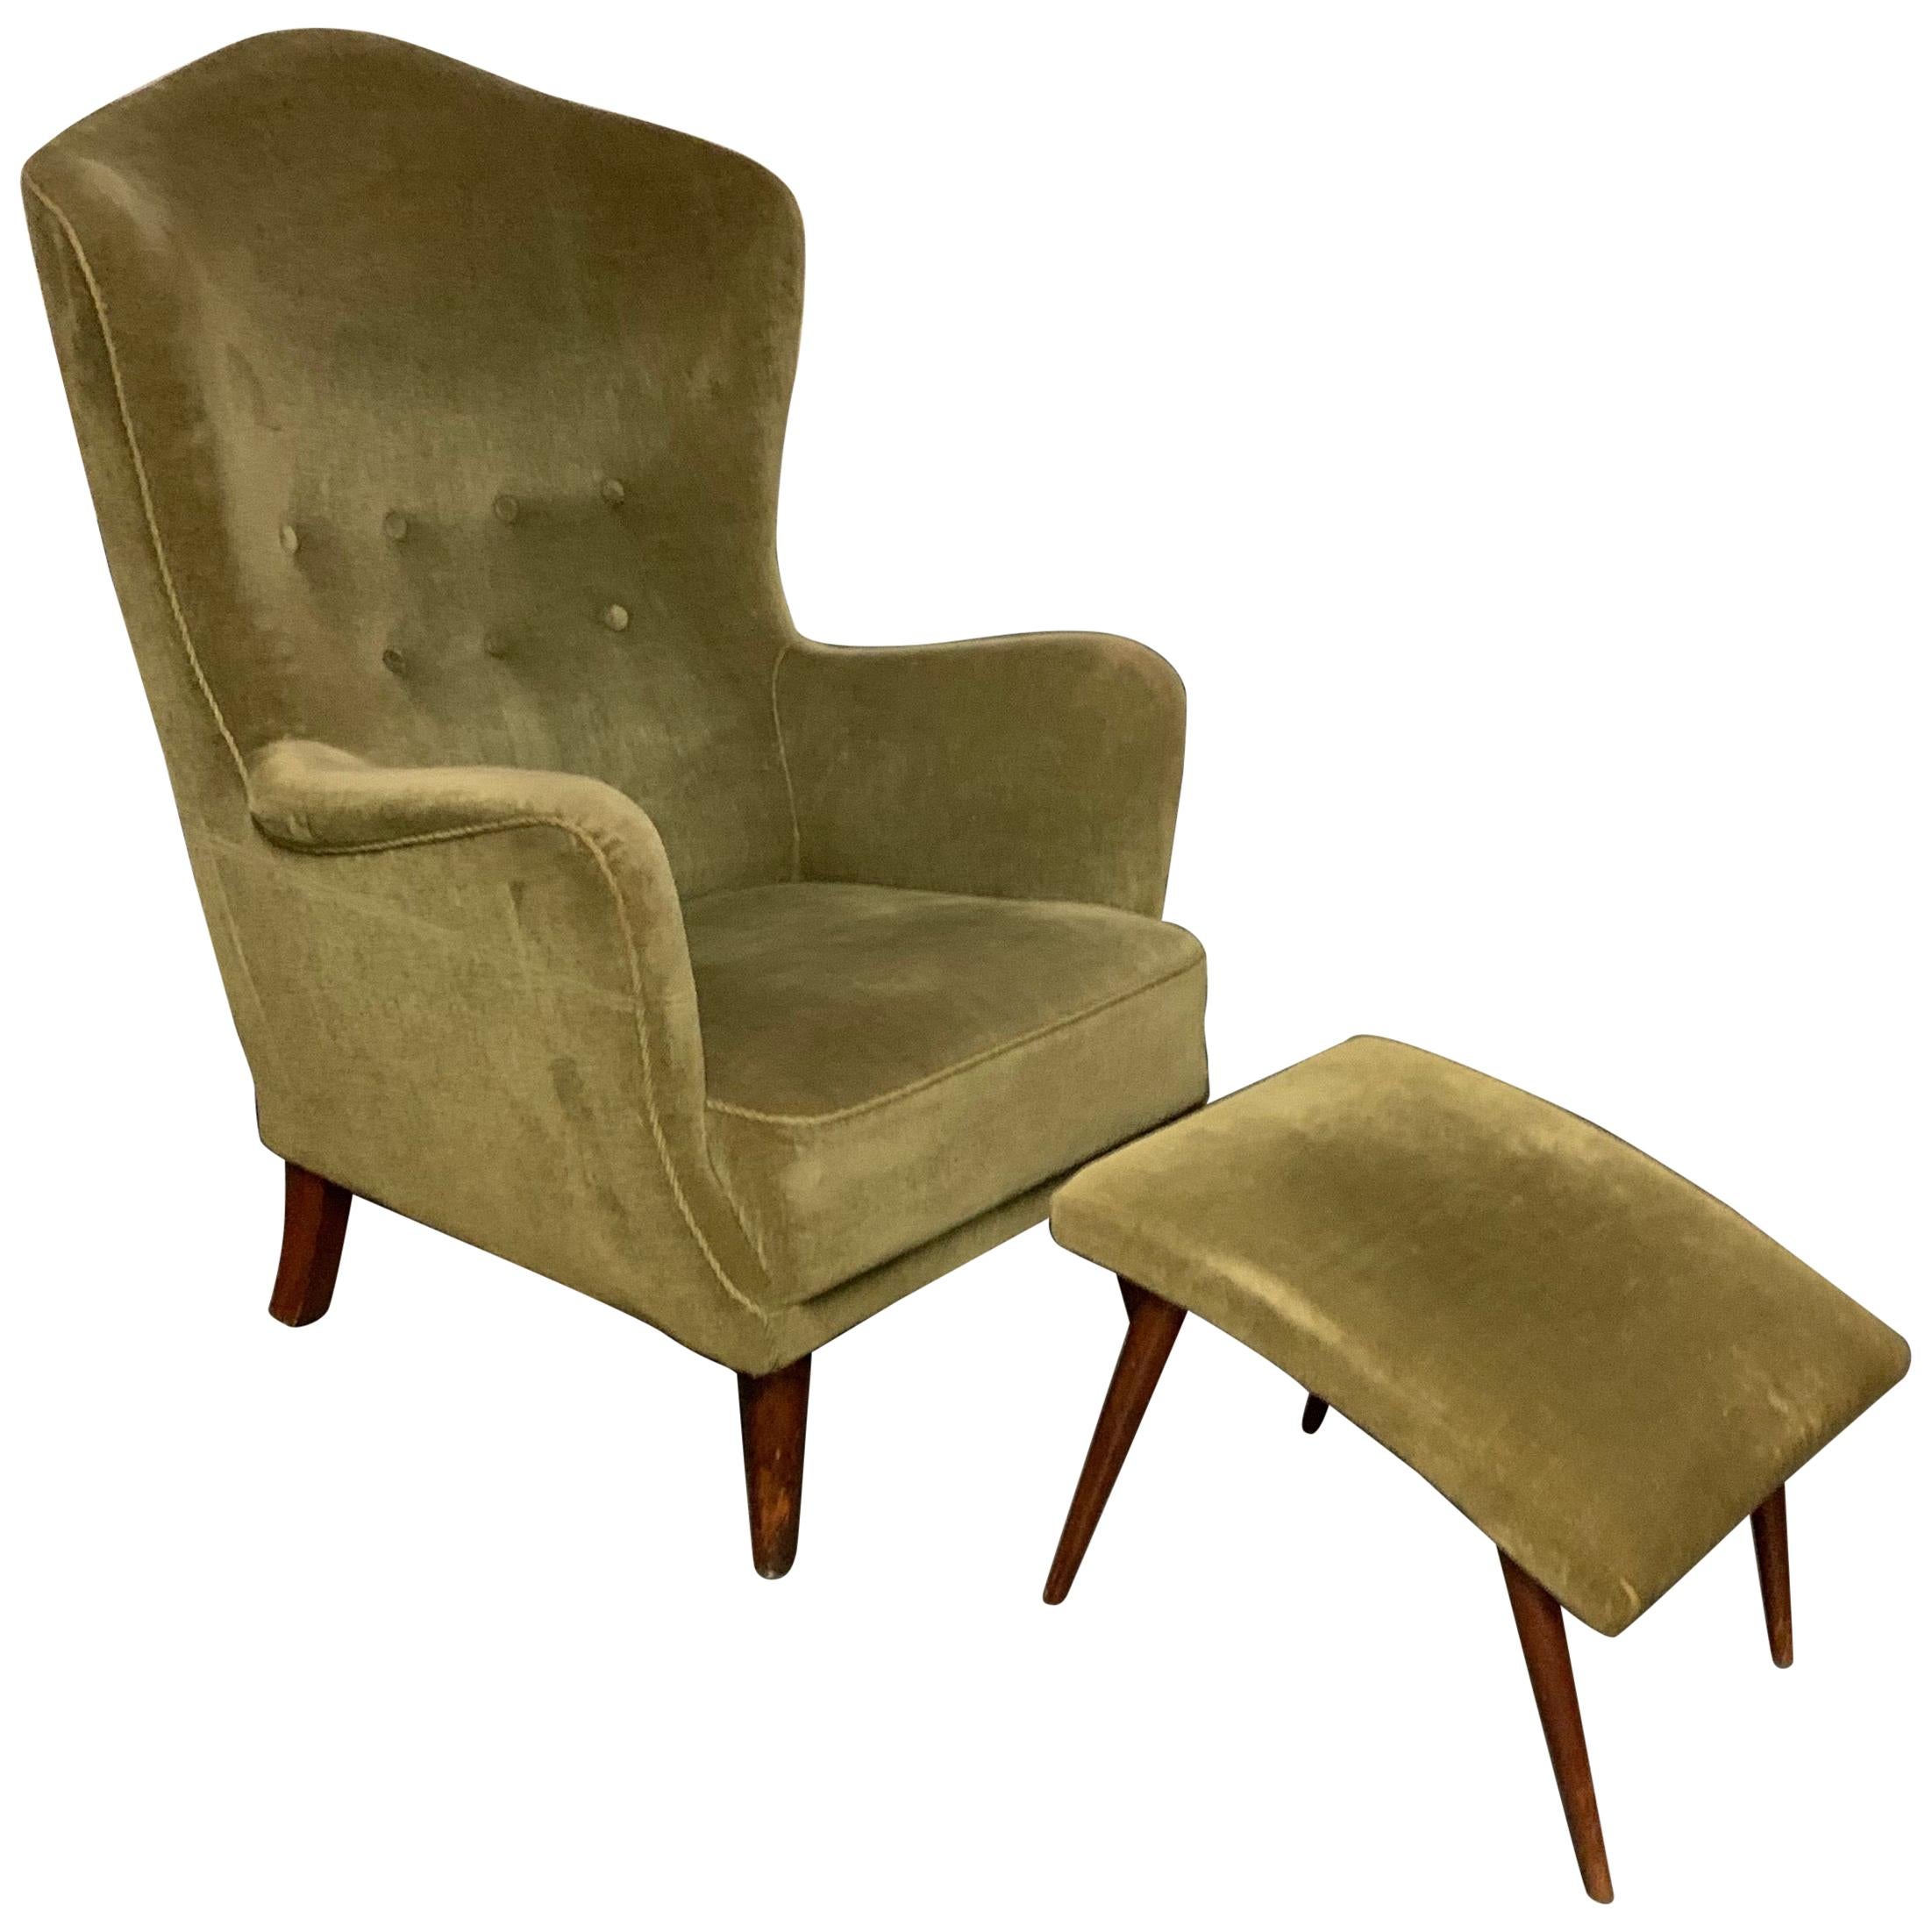 Elegant Italien Lounge Chair with Stool